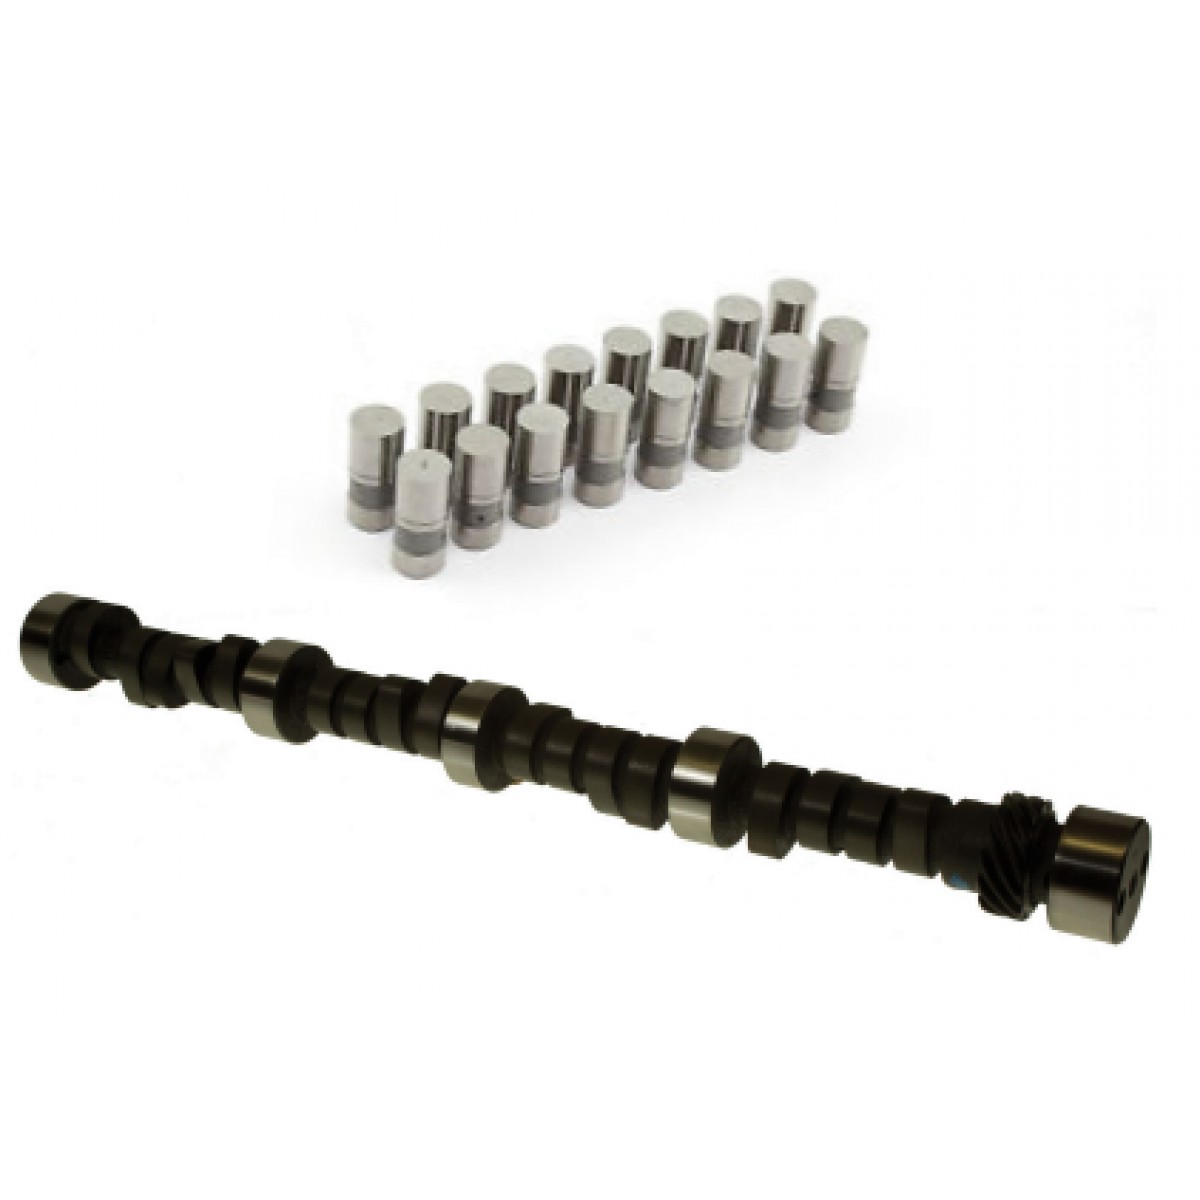 Sbc Chevy Cam Kit 2 305 327 350 400 350 H P 447 447 223 223 Hydraulic Flat Tappet Camshaft Es179r Eng L817 16 Lifters